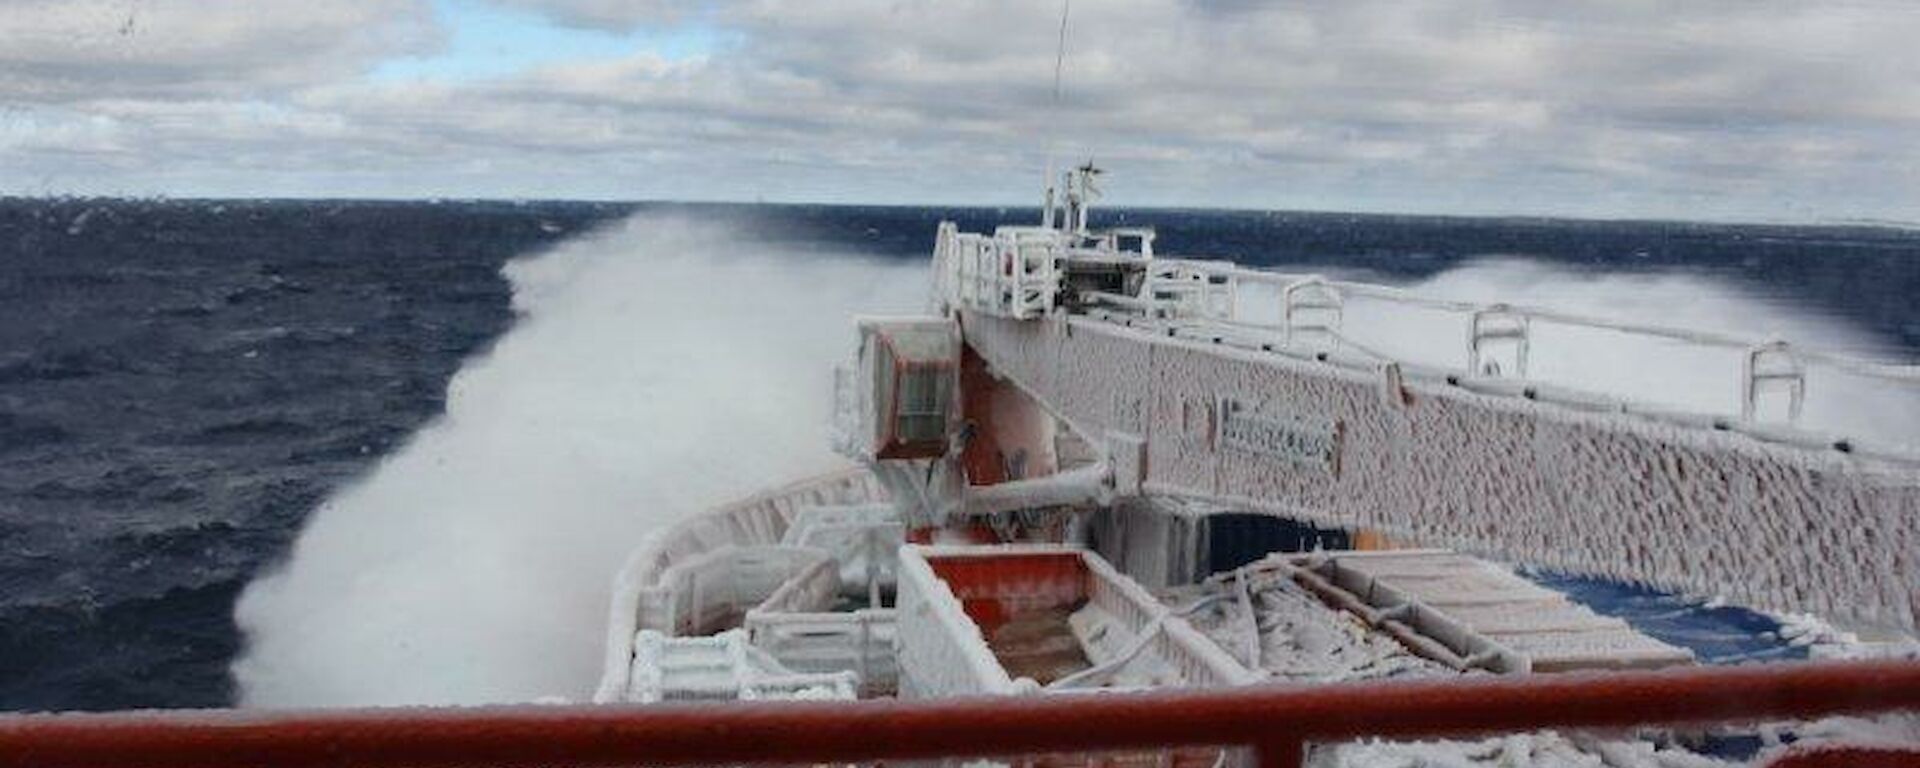 Snow and ice on the ship due to cold weather